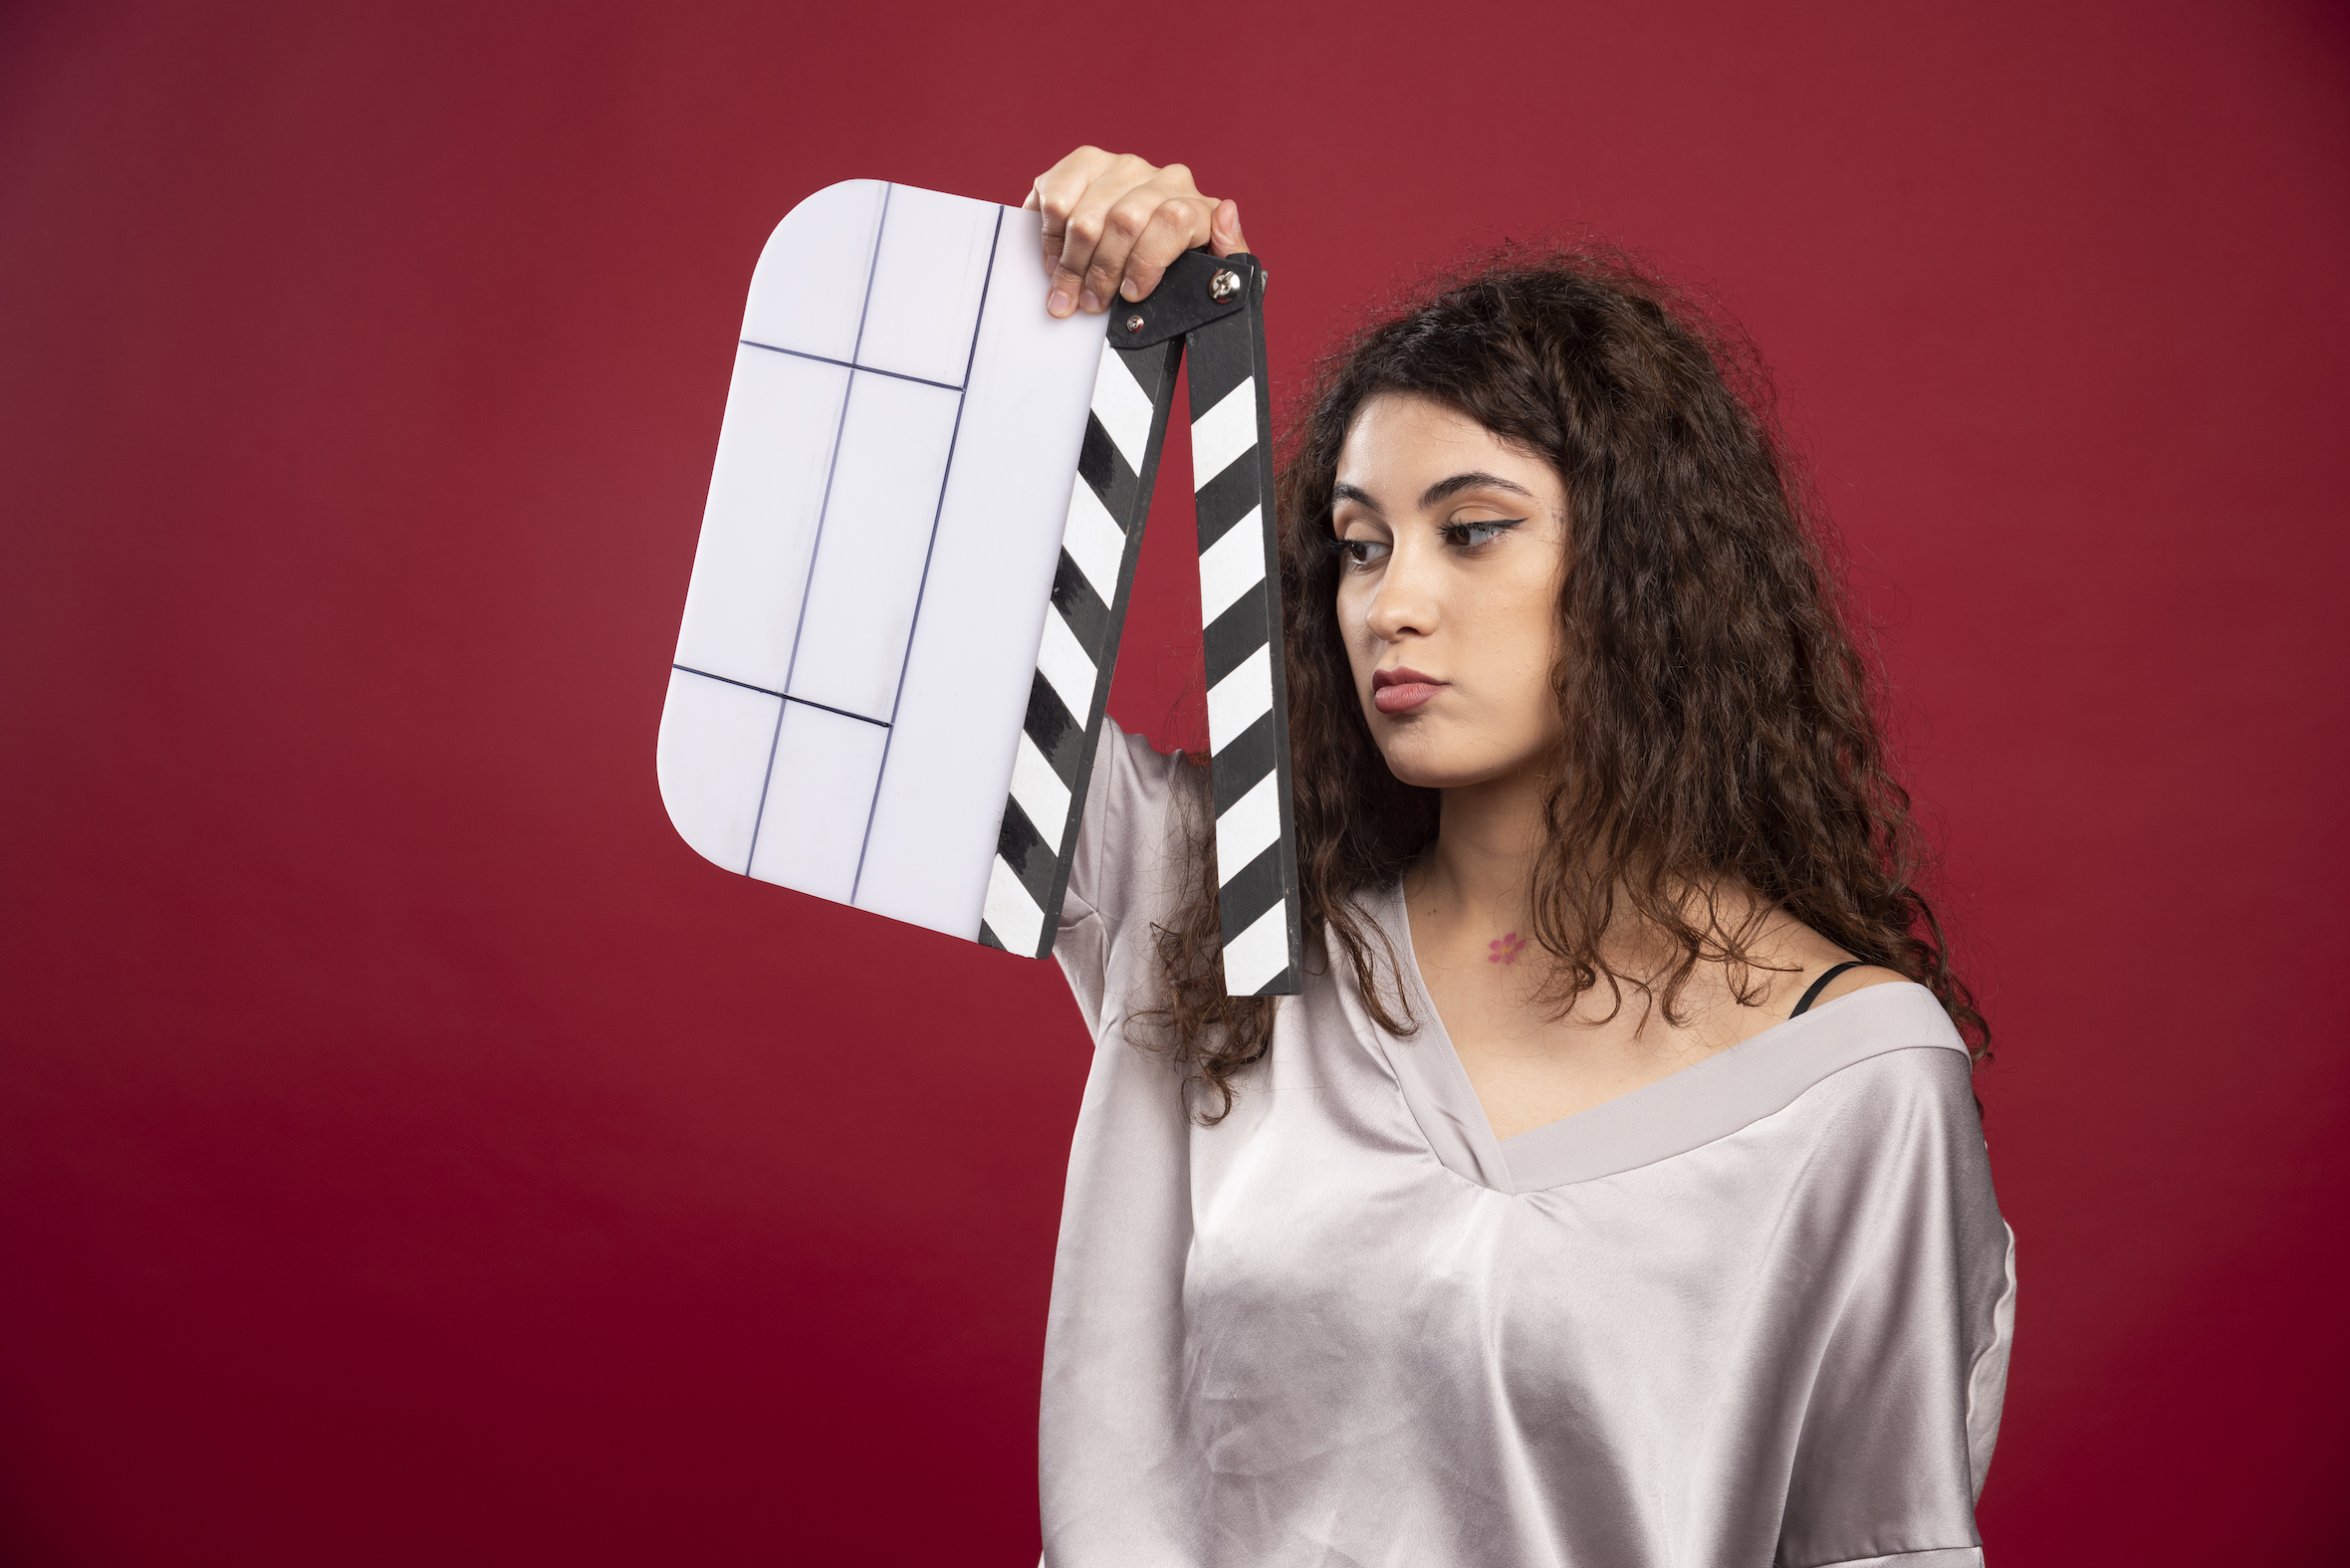 Brunette woman looking at clapperboard on red background